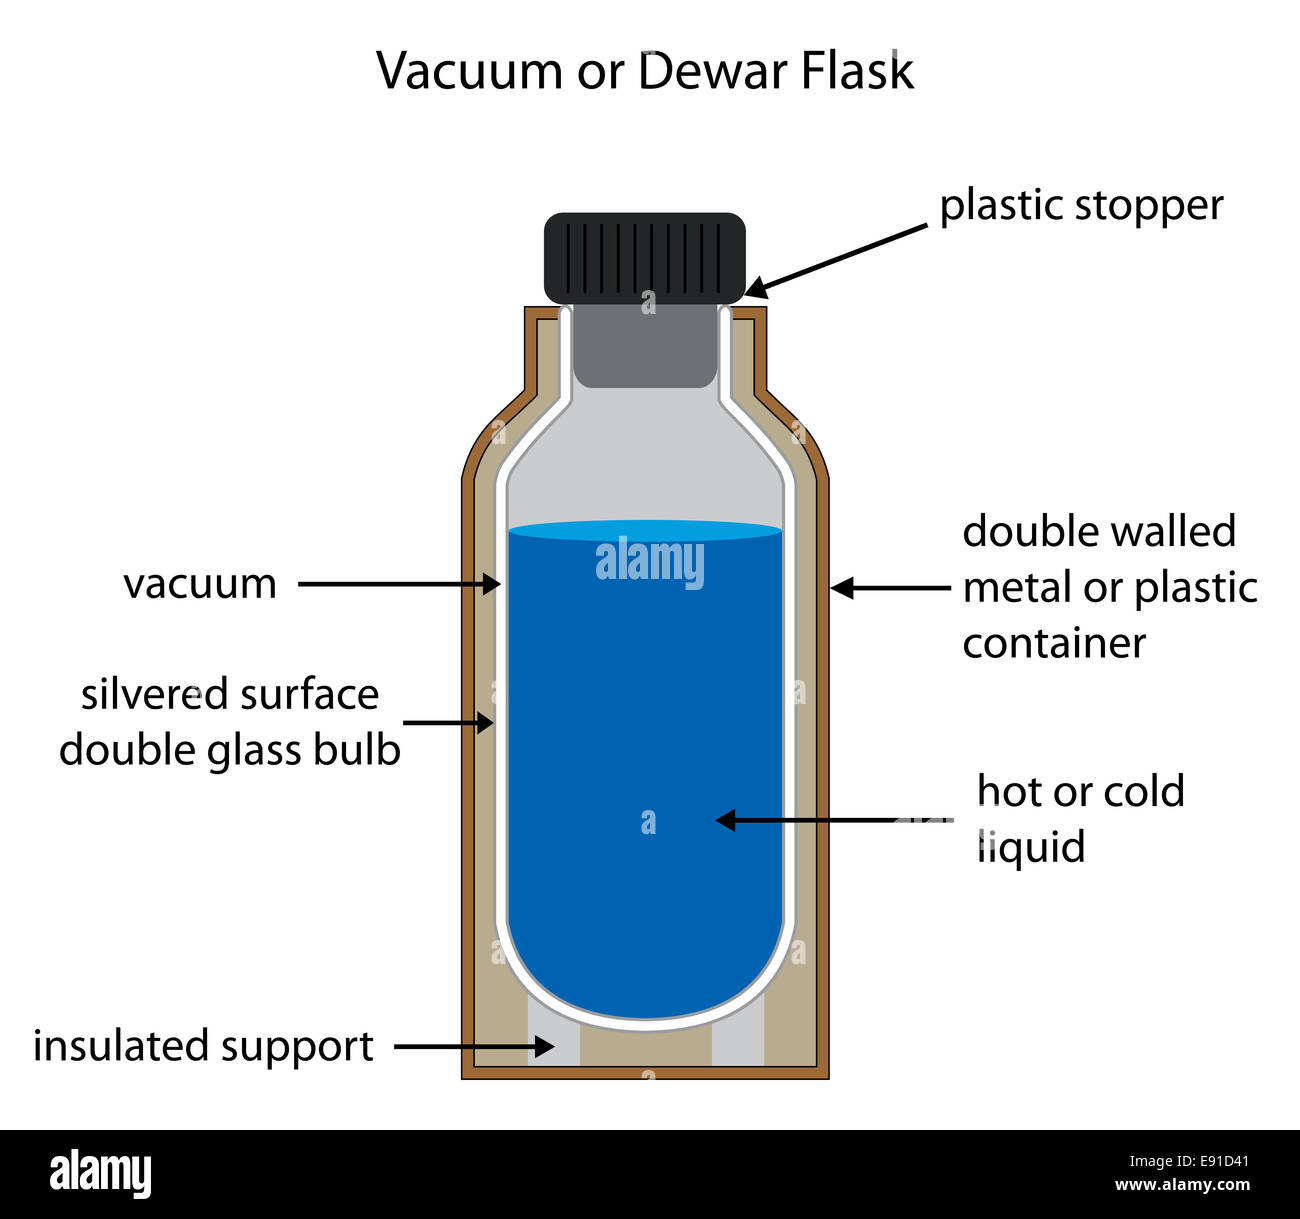 https://c8.alamy.com/comp/E91D41/dewar-or-vacuum-flask-fully-labeled-diagram-with-editable-layers-E91D41.jpg